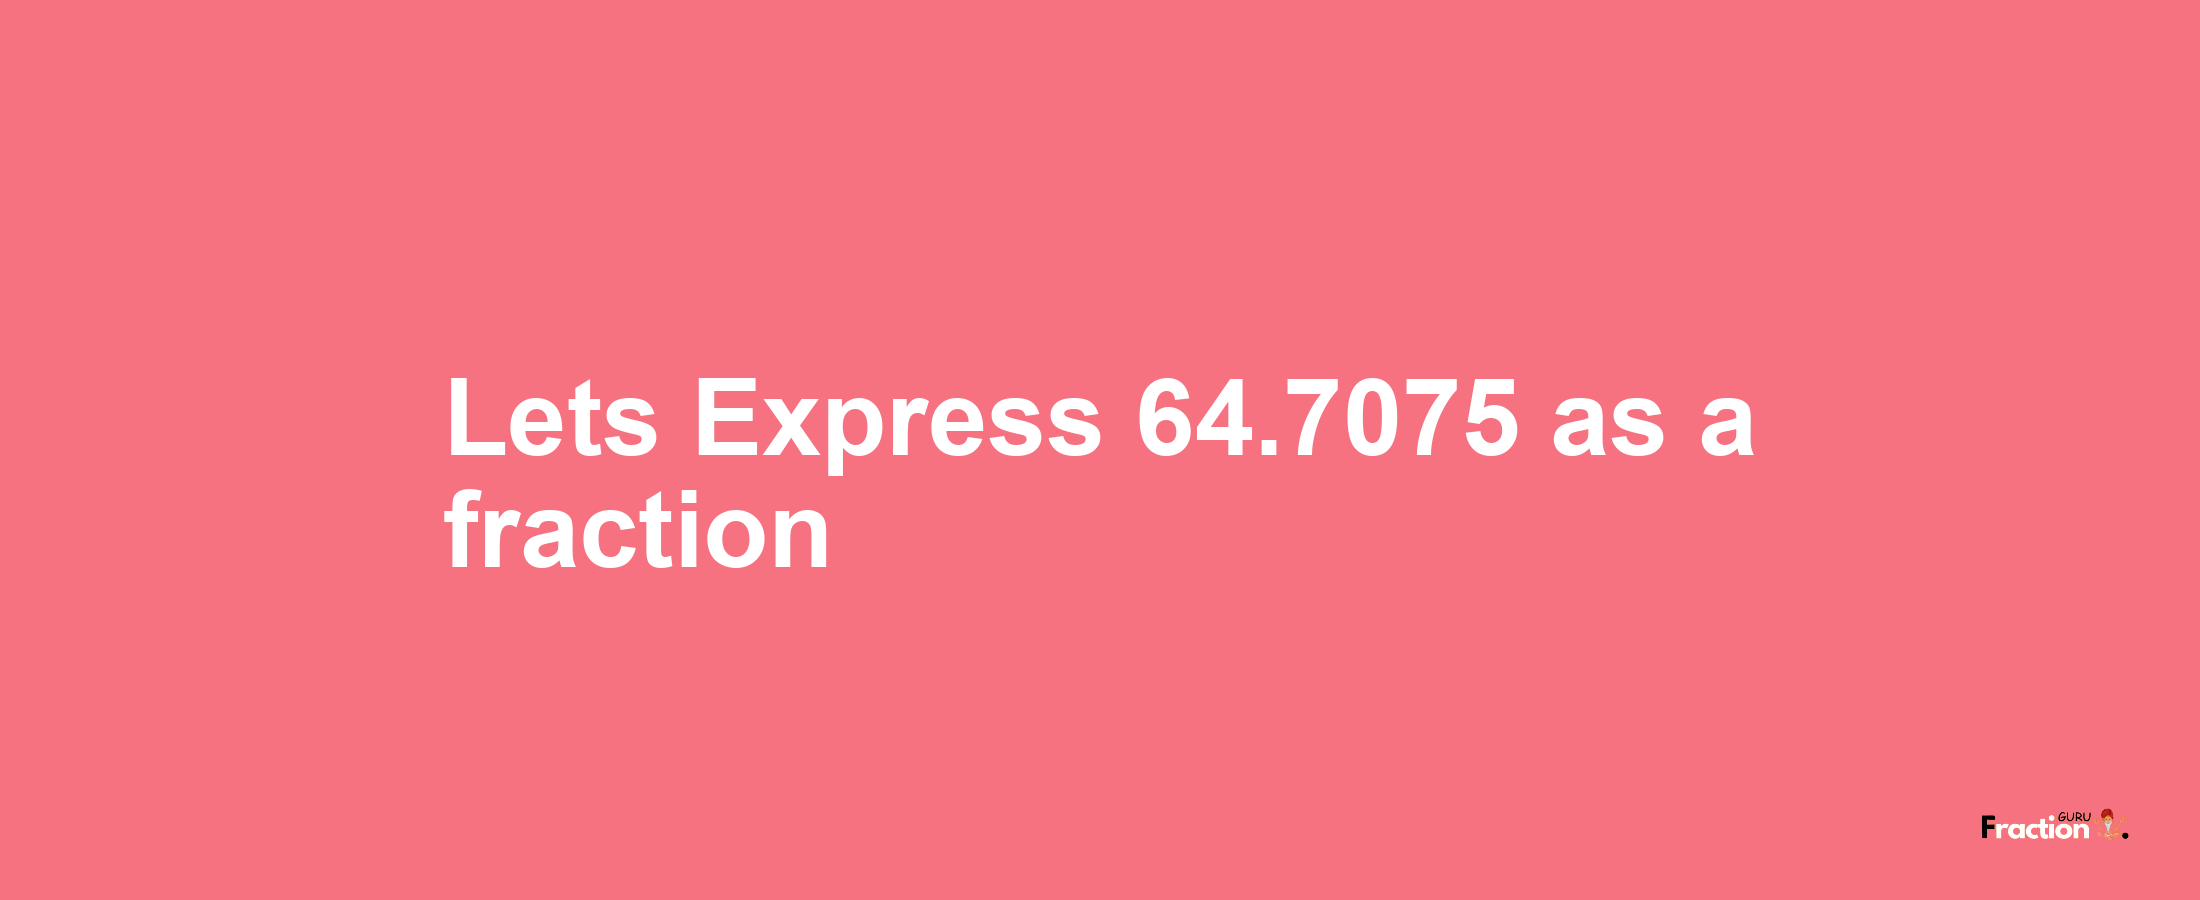 Lets Express 64.7075 as afraction